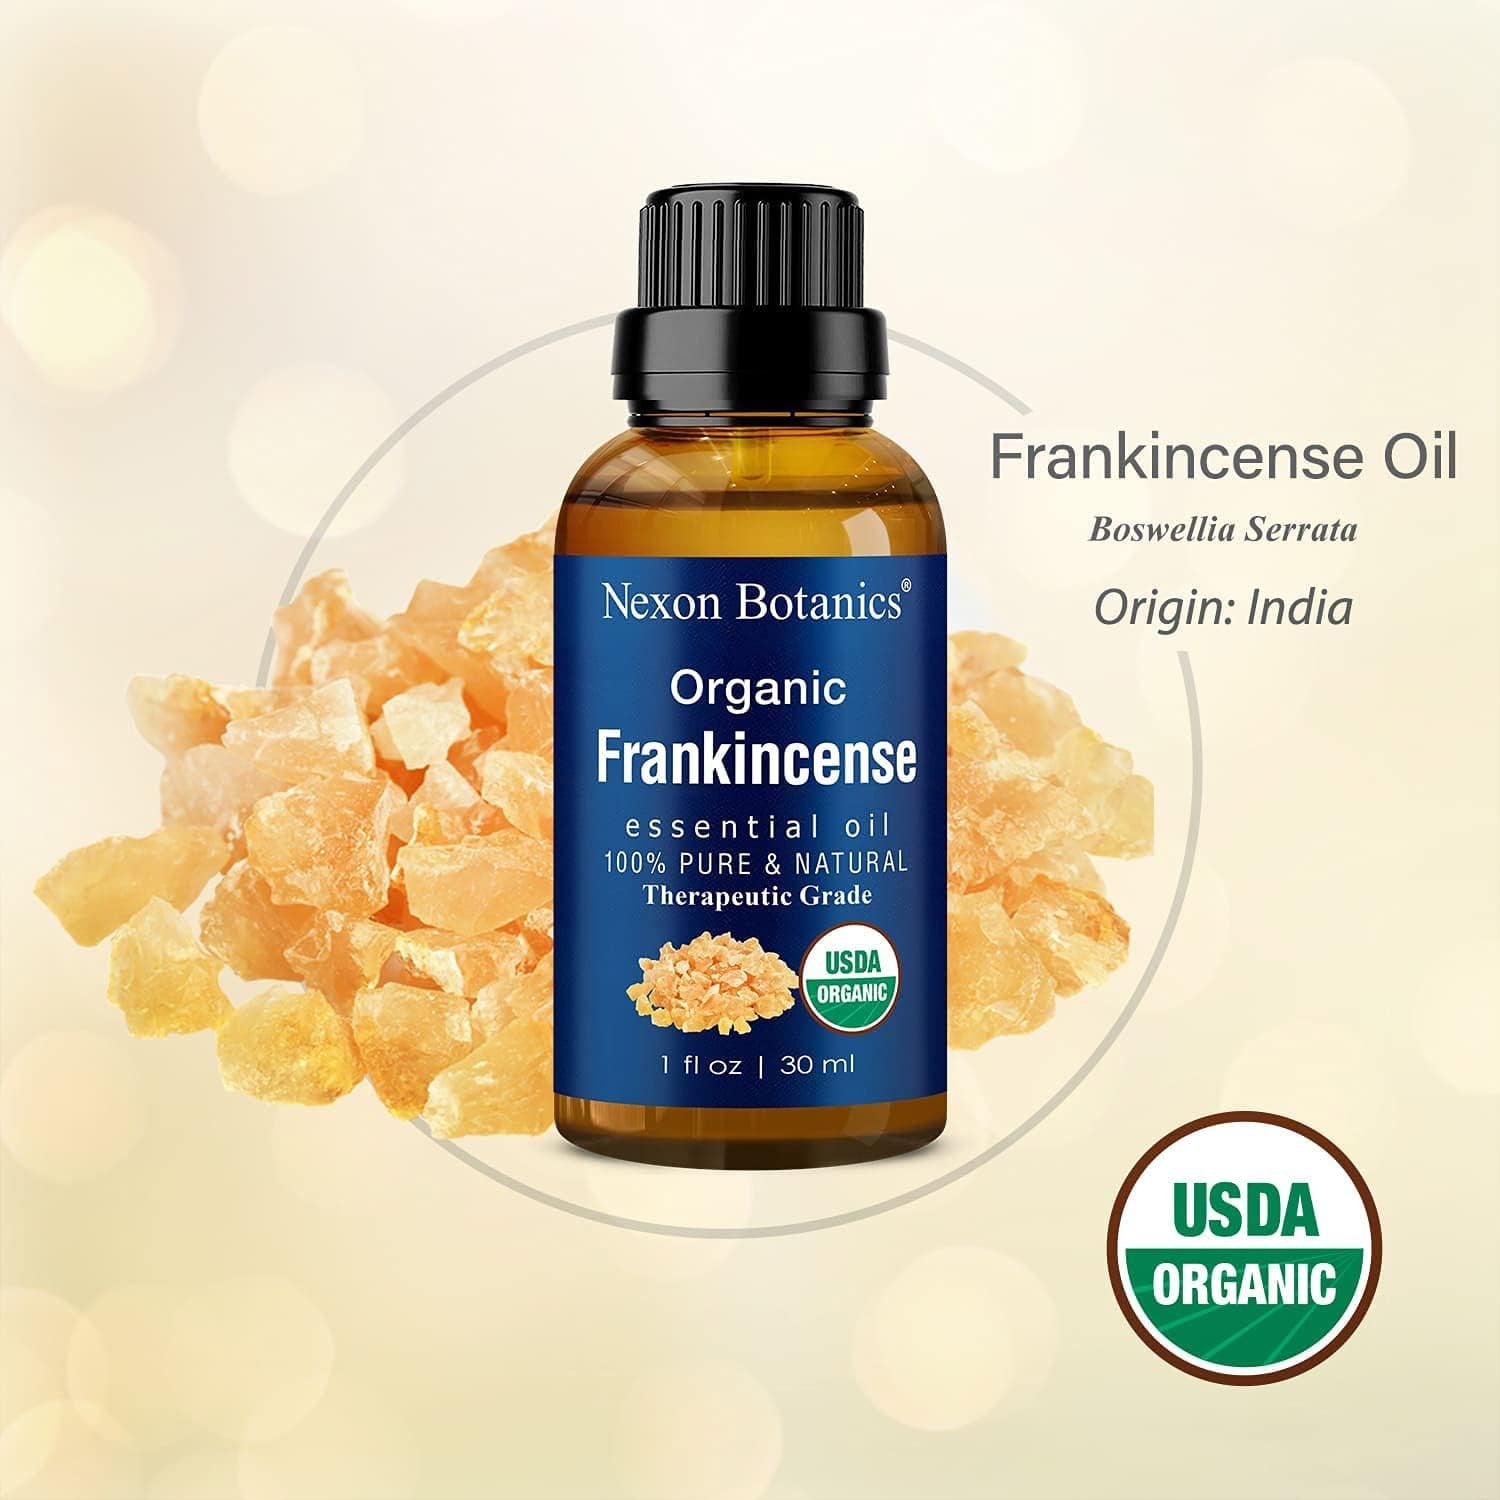 "Pure and Natural Organic Frankincense Essential Oil - Therapeutic Grade for Aromatherapy, Diffuser, and Skin & Hair Care - 30Ml"